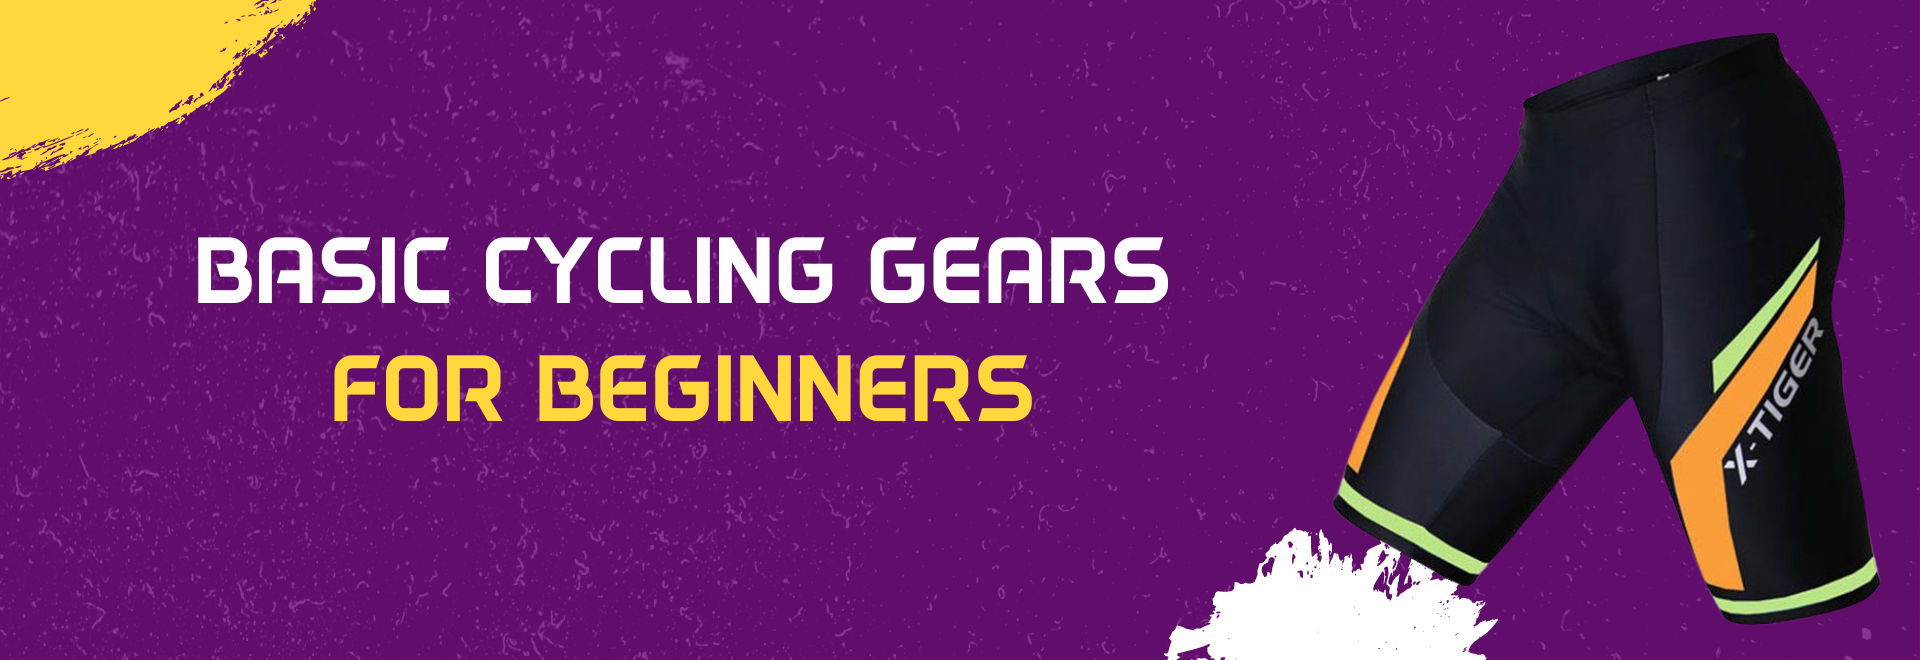 Basic Cycling Gears for Beginners